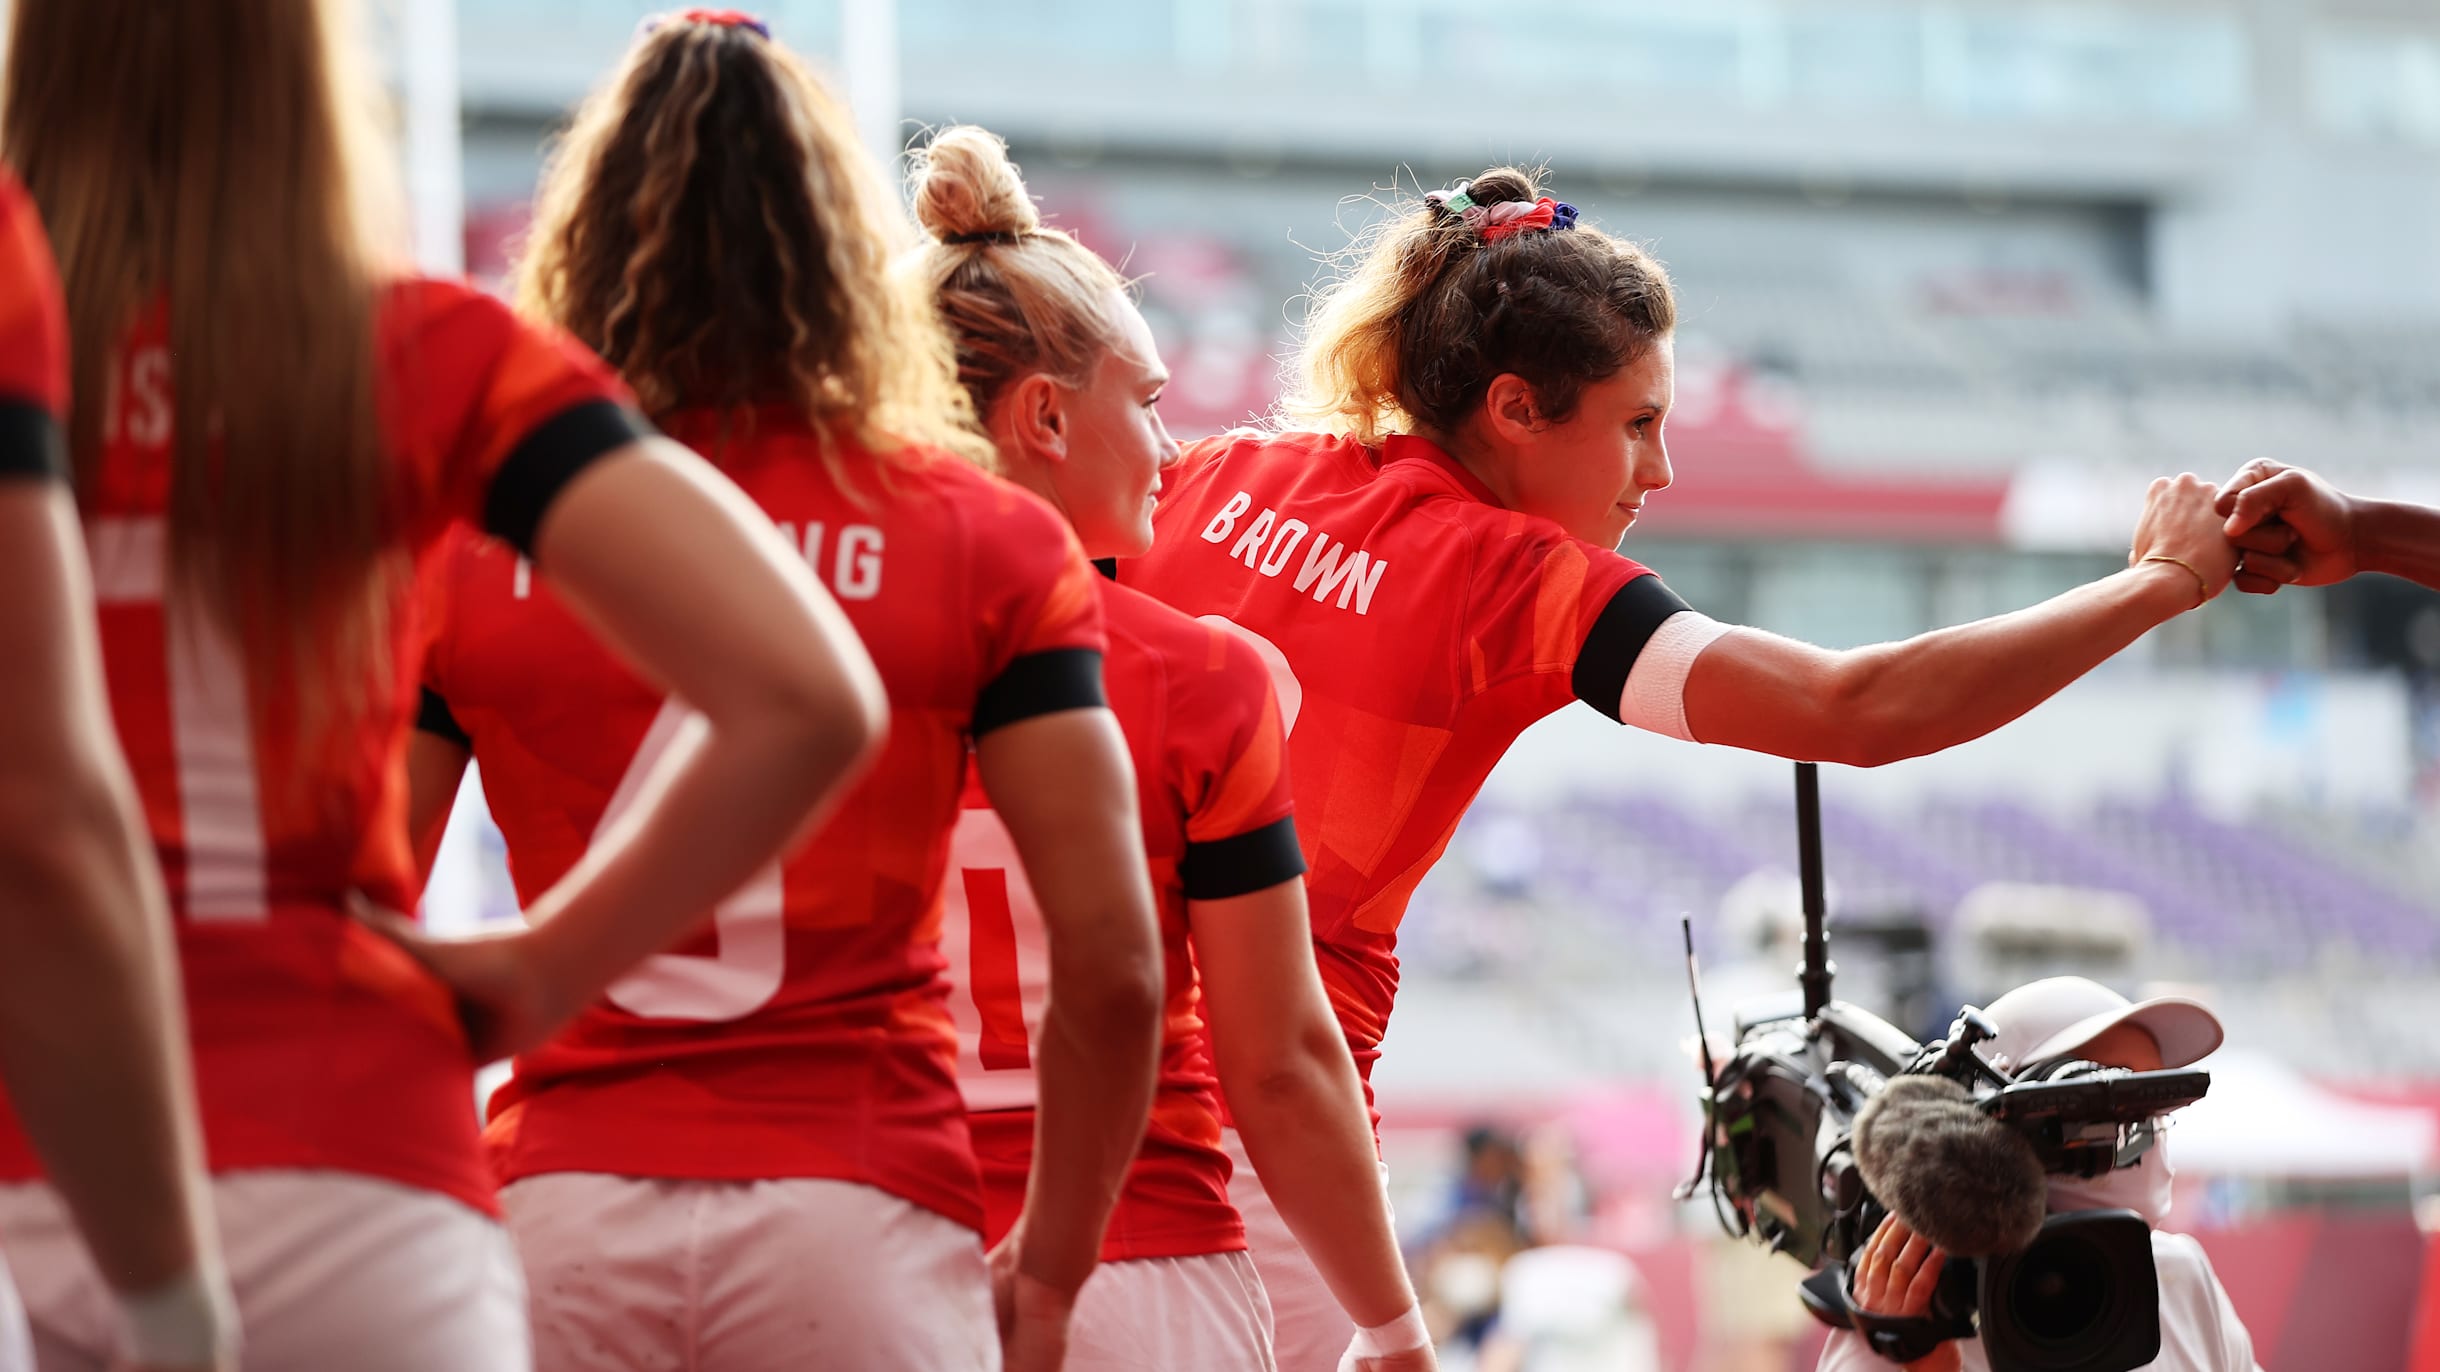 European Games 2023 Great Britain women and Ireland mens rugby sevens squads headed to Paris 2024 after striking gold in Krakow